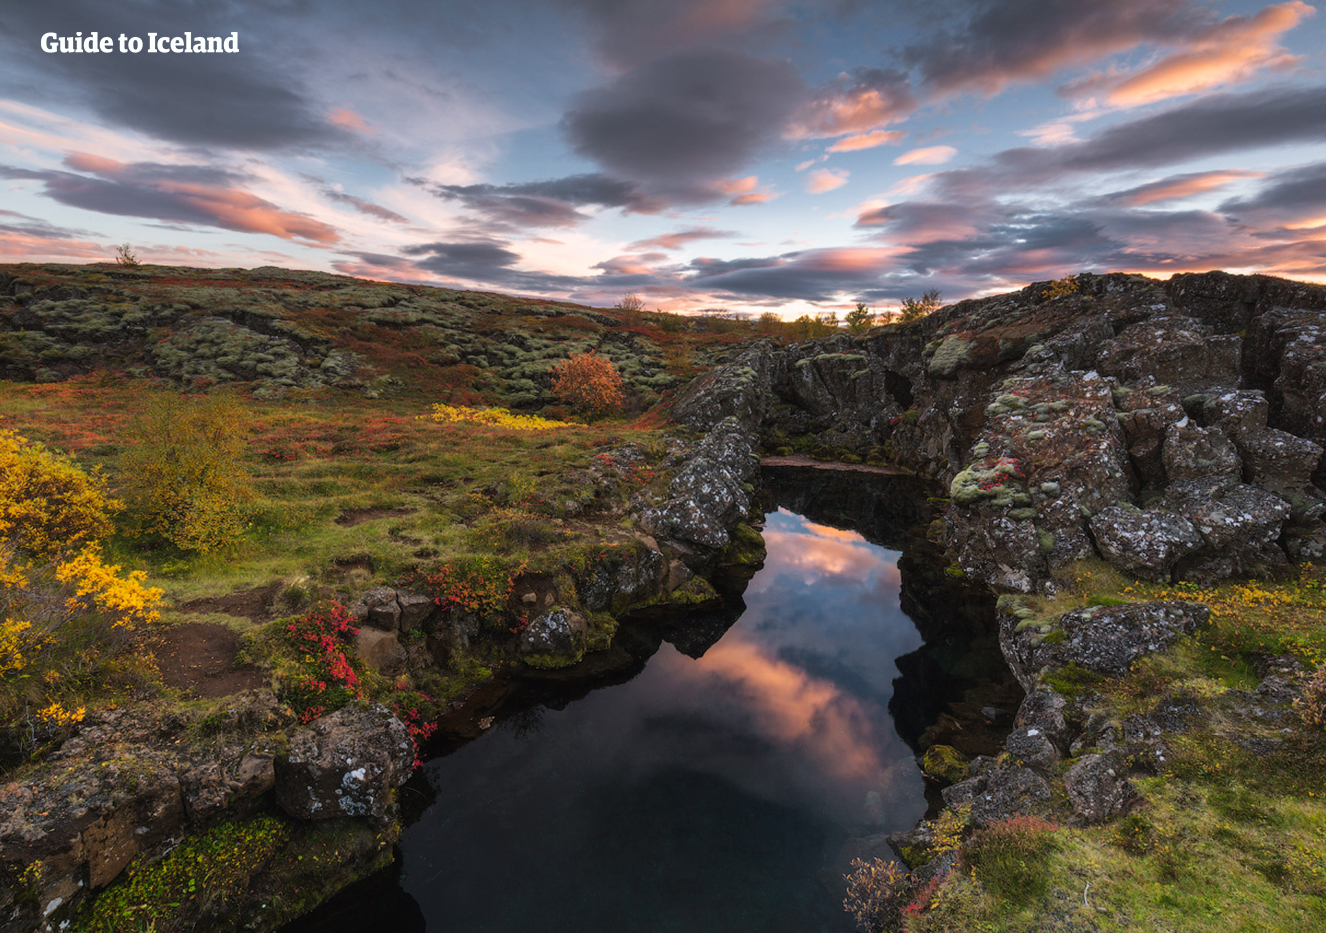 Silfra gorge in Þingvellir National Park is an esteemed location for snorkelling and diving; it is accessible throughout the year, as it maintains a constant temperature of two degrees Celsius.